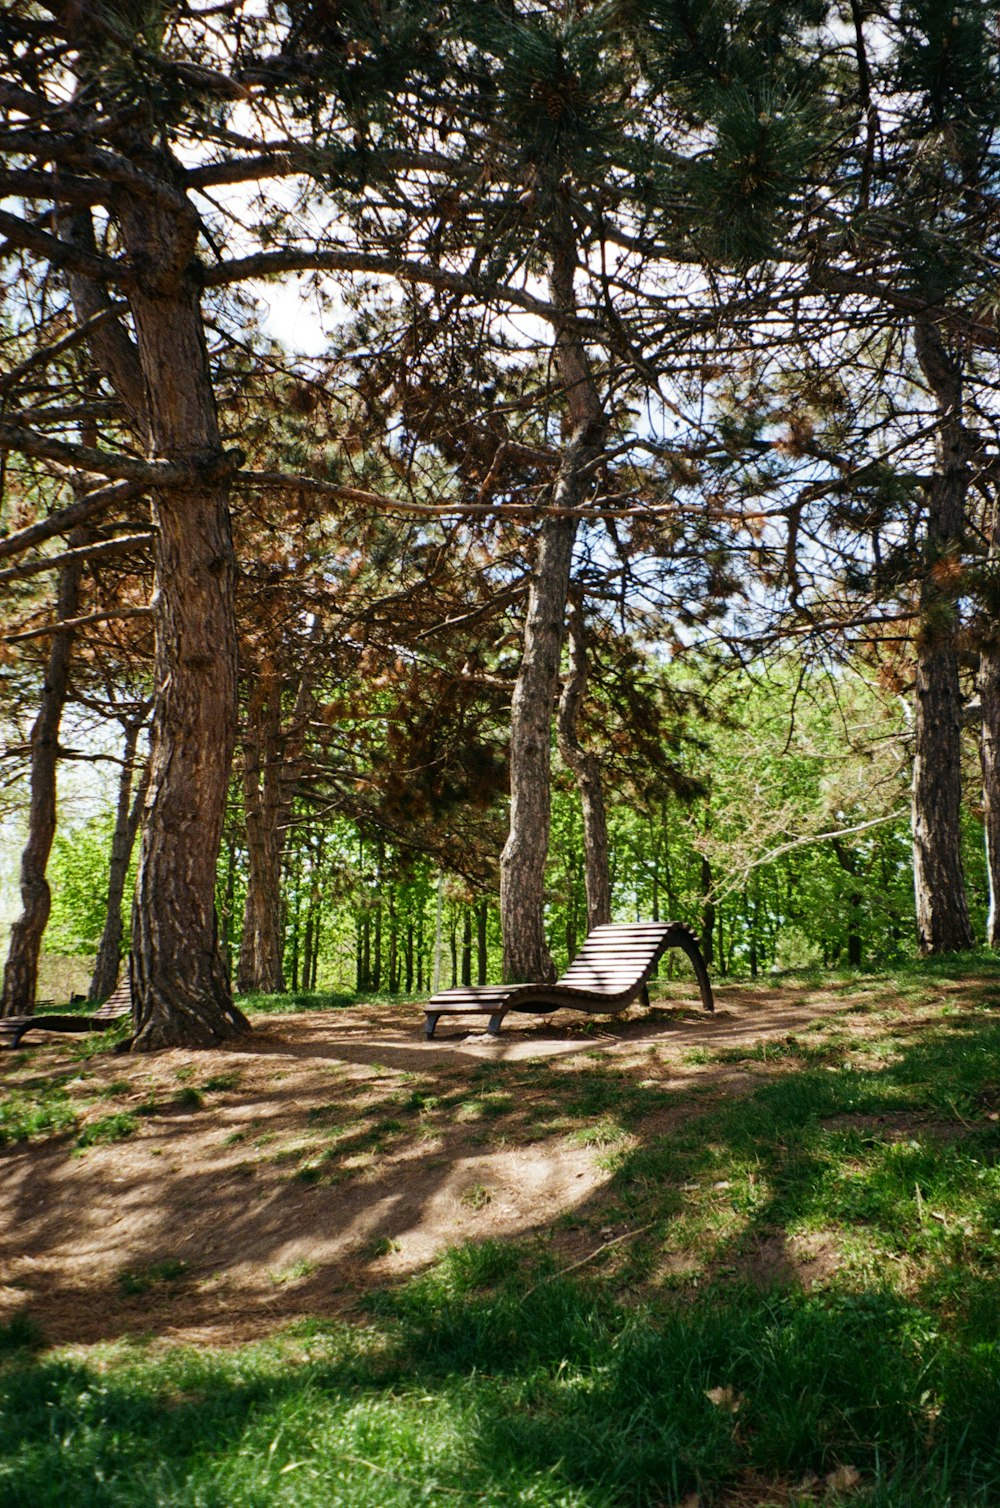 a park bench sitting in the shade of some trees